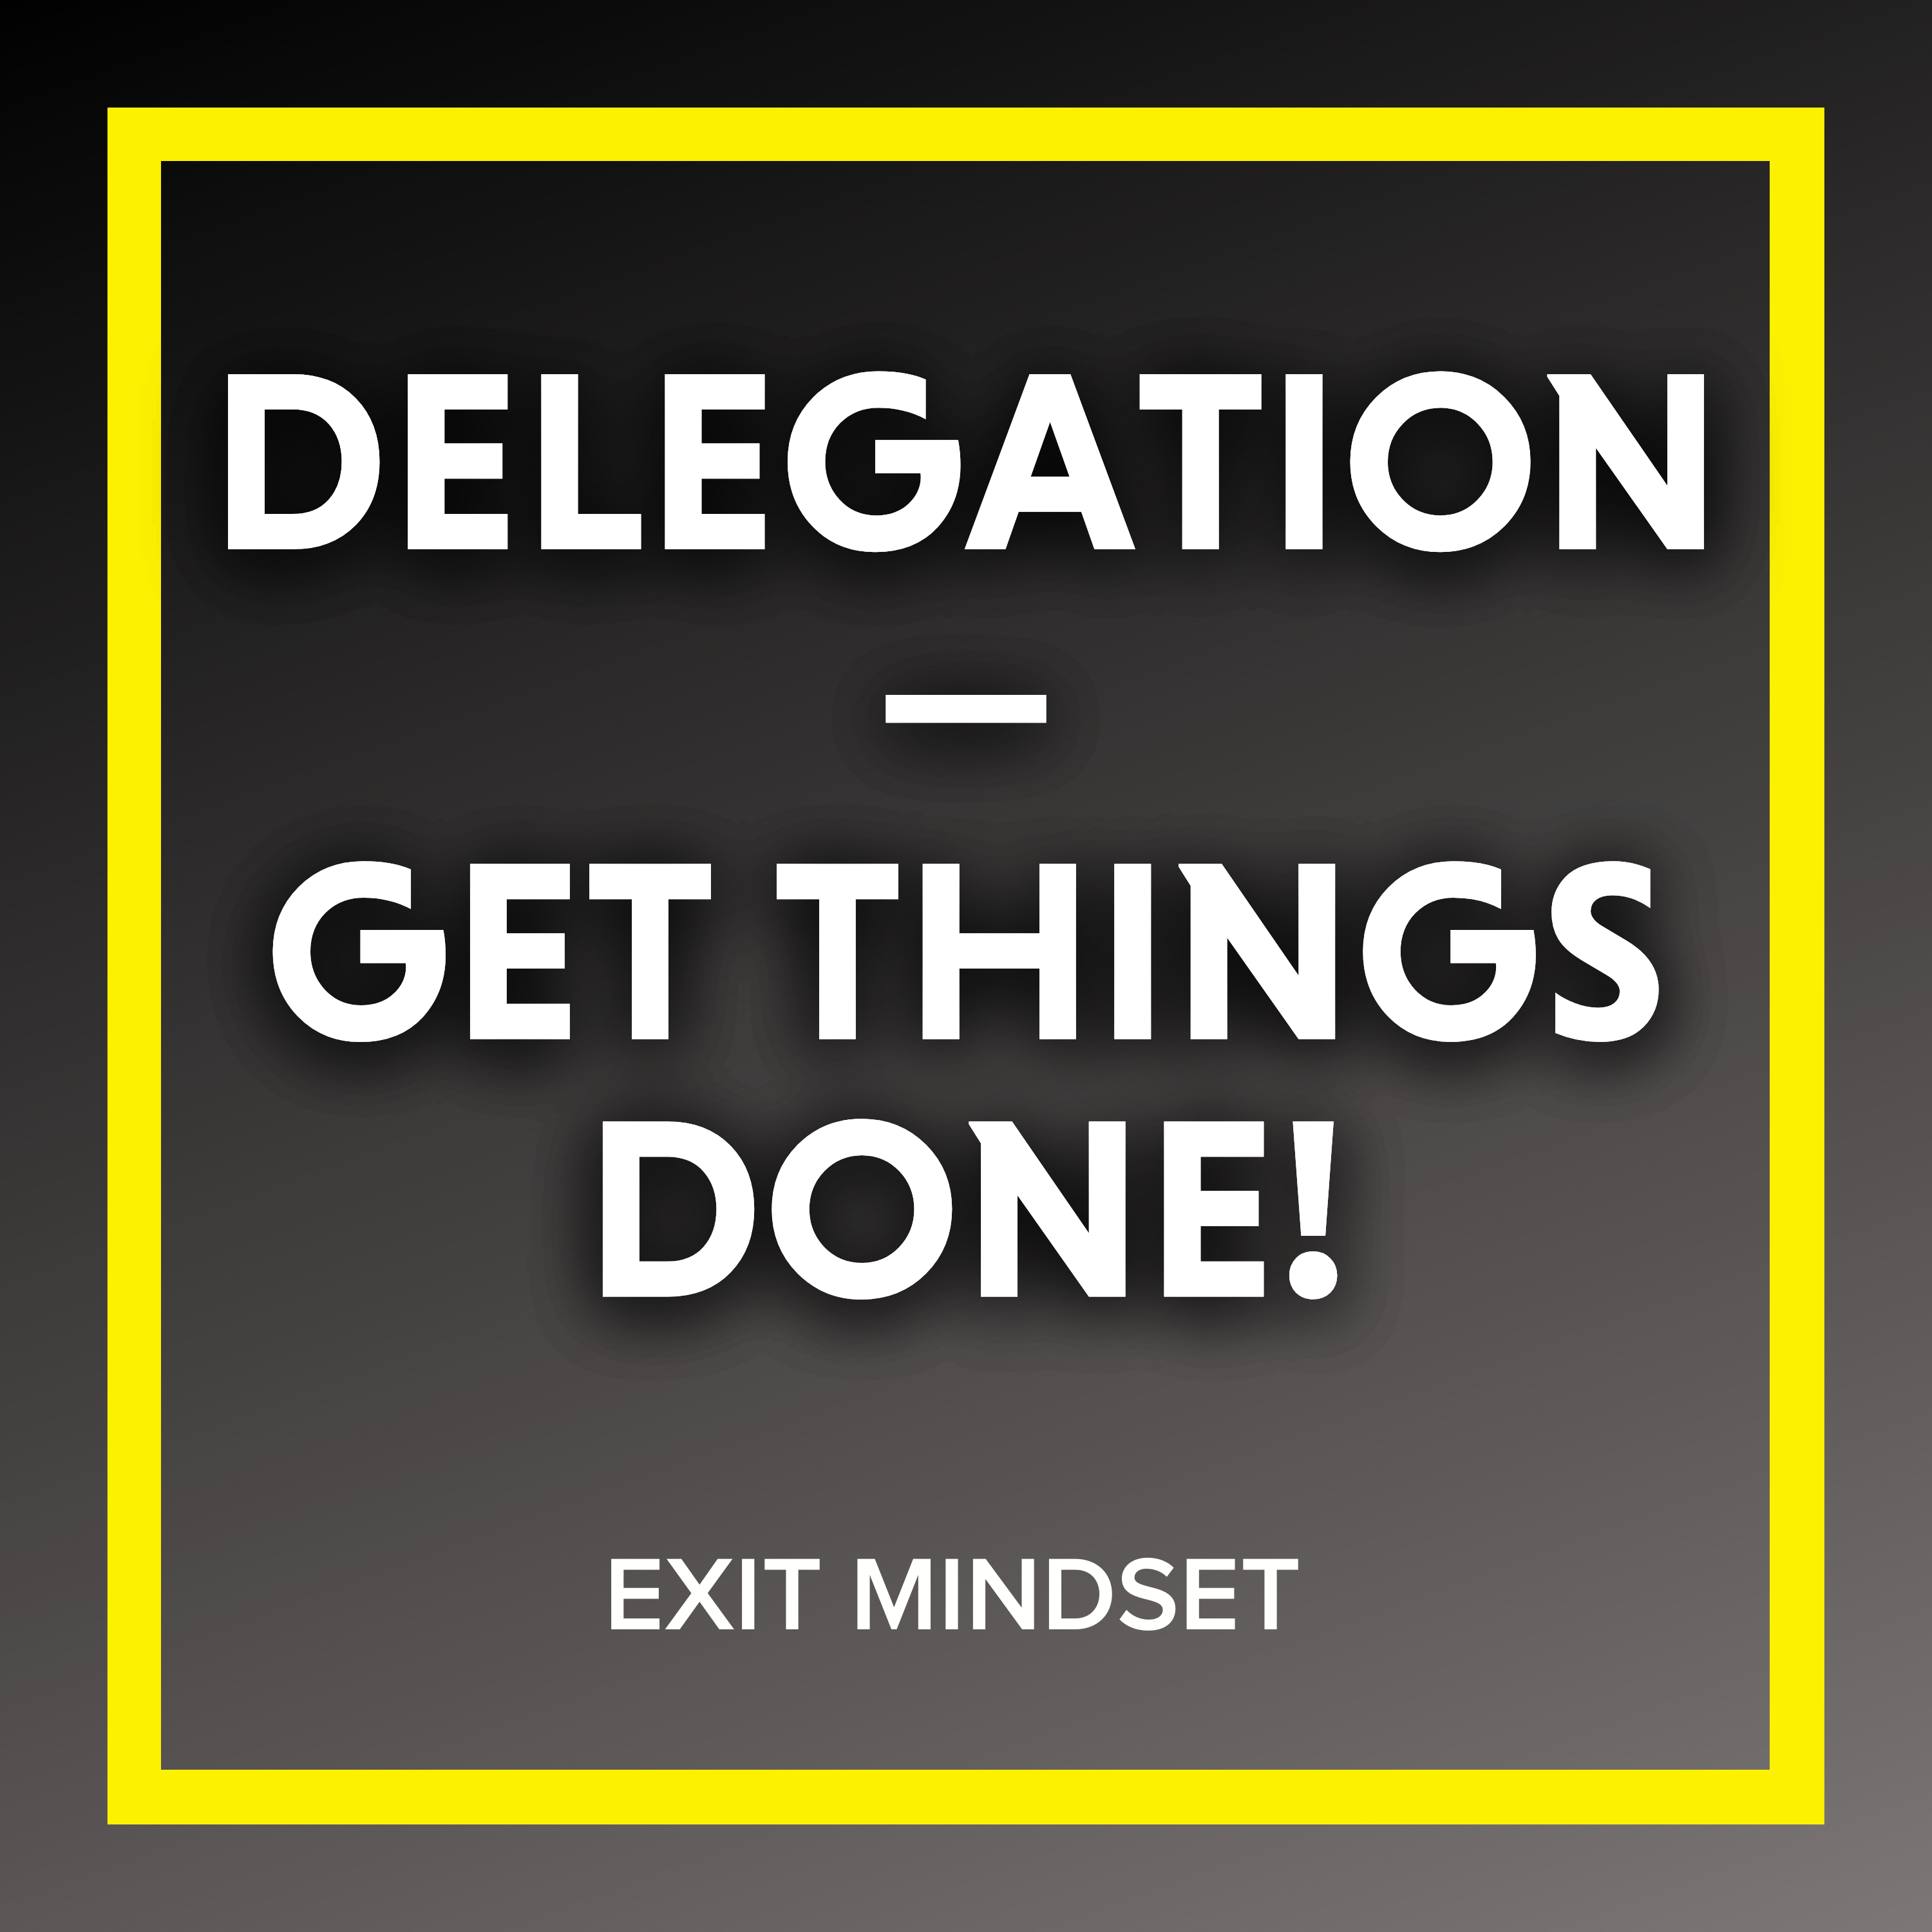 Delegation - Get Things Done!